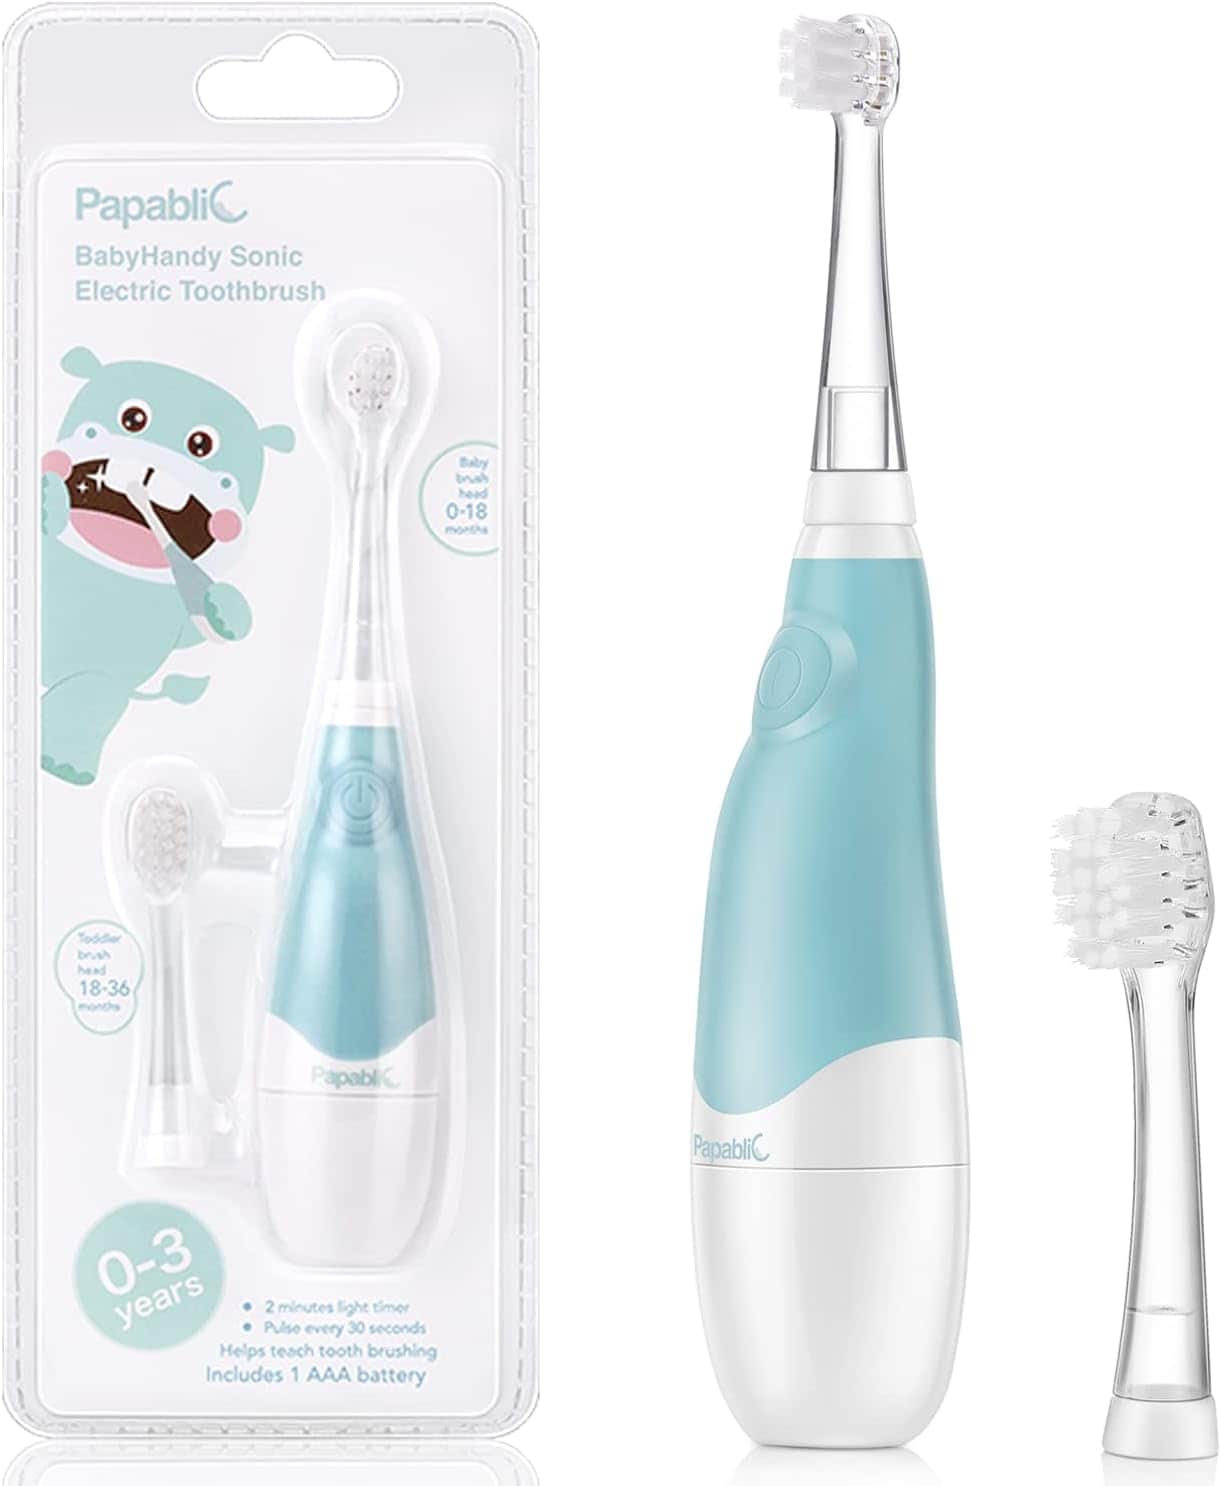 Papablic BabyHandy 2-Stage Baby Sonic Electric Toothbrush for Babies